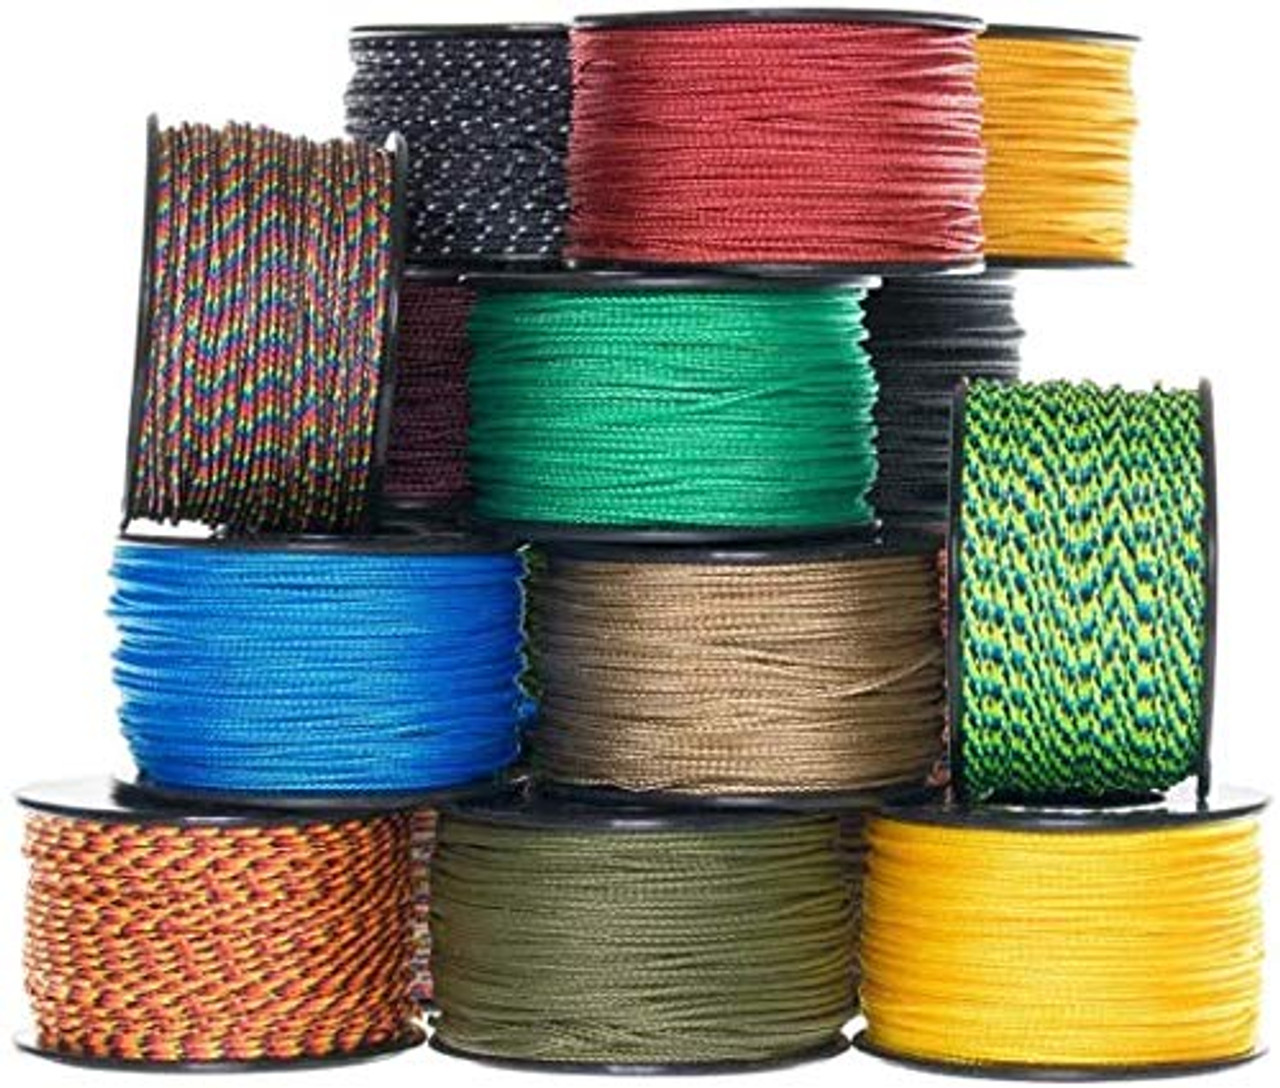 US Ropes 6 Pieces Assorted Atwood Rope MFG Micro Utility Cord 1.18mm X  125ft Reusable Spool  Tactical Nylon/Polyester Fishing Gear, Jewelry Making,  Camping Accessories (Assorted) - US Stainless